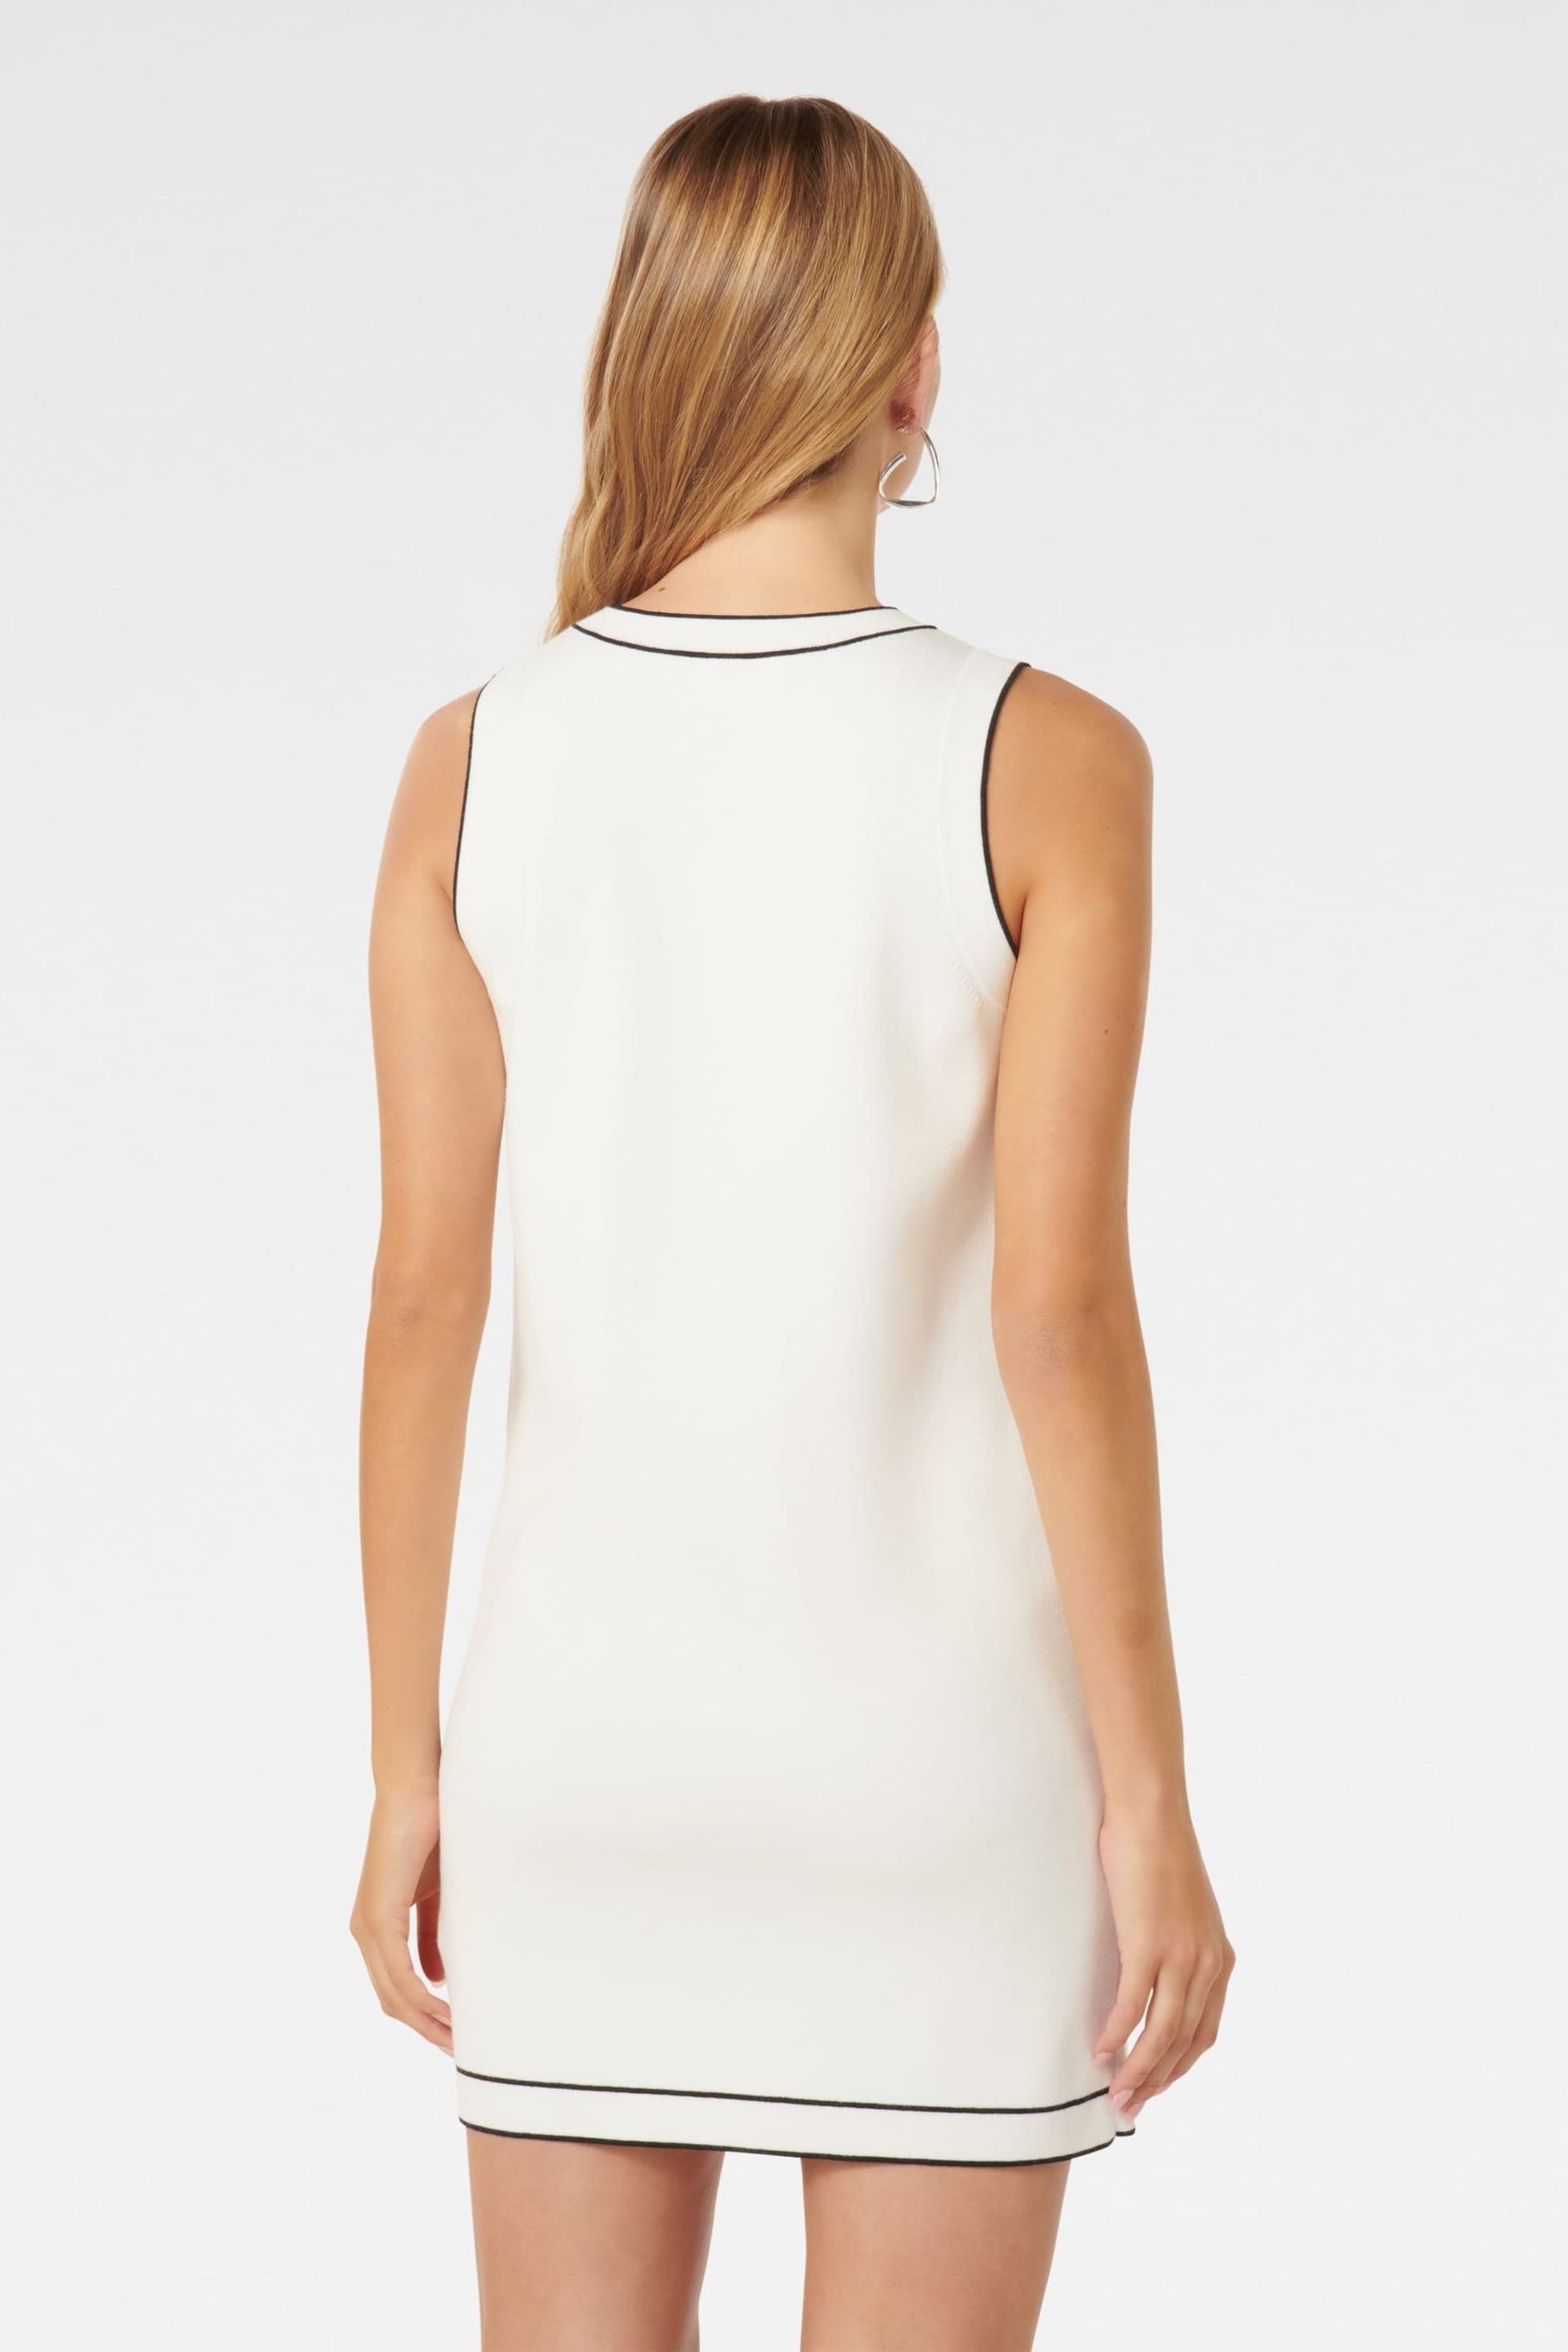 Forever New White Molly Tipped Mini Dress - Image 5 of 5